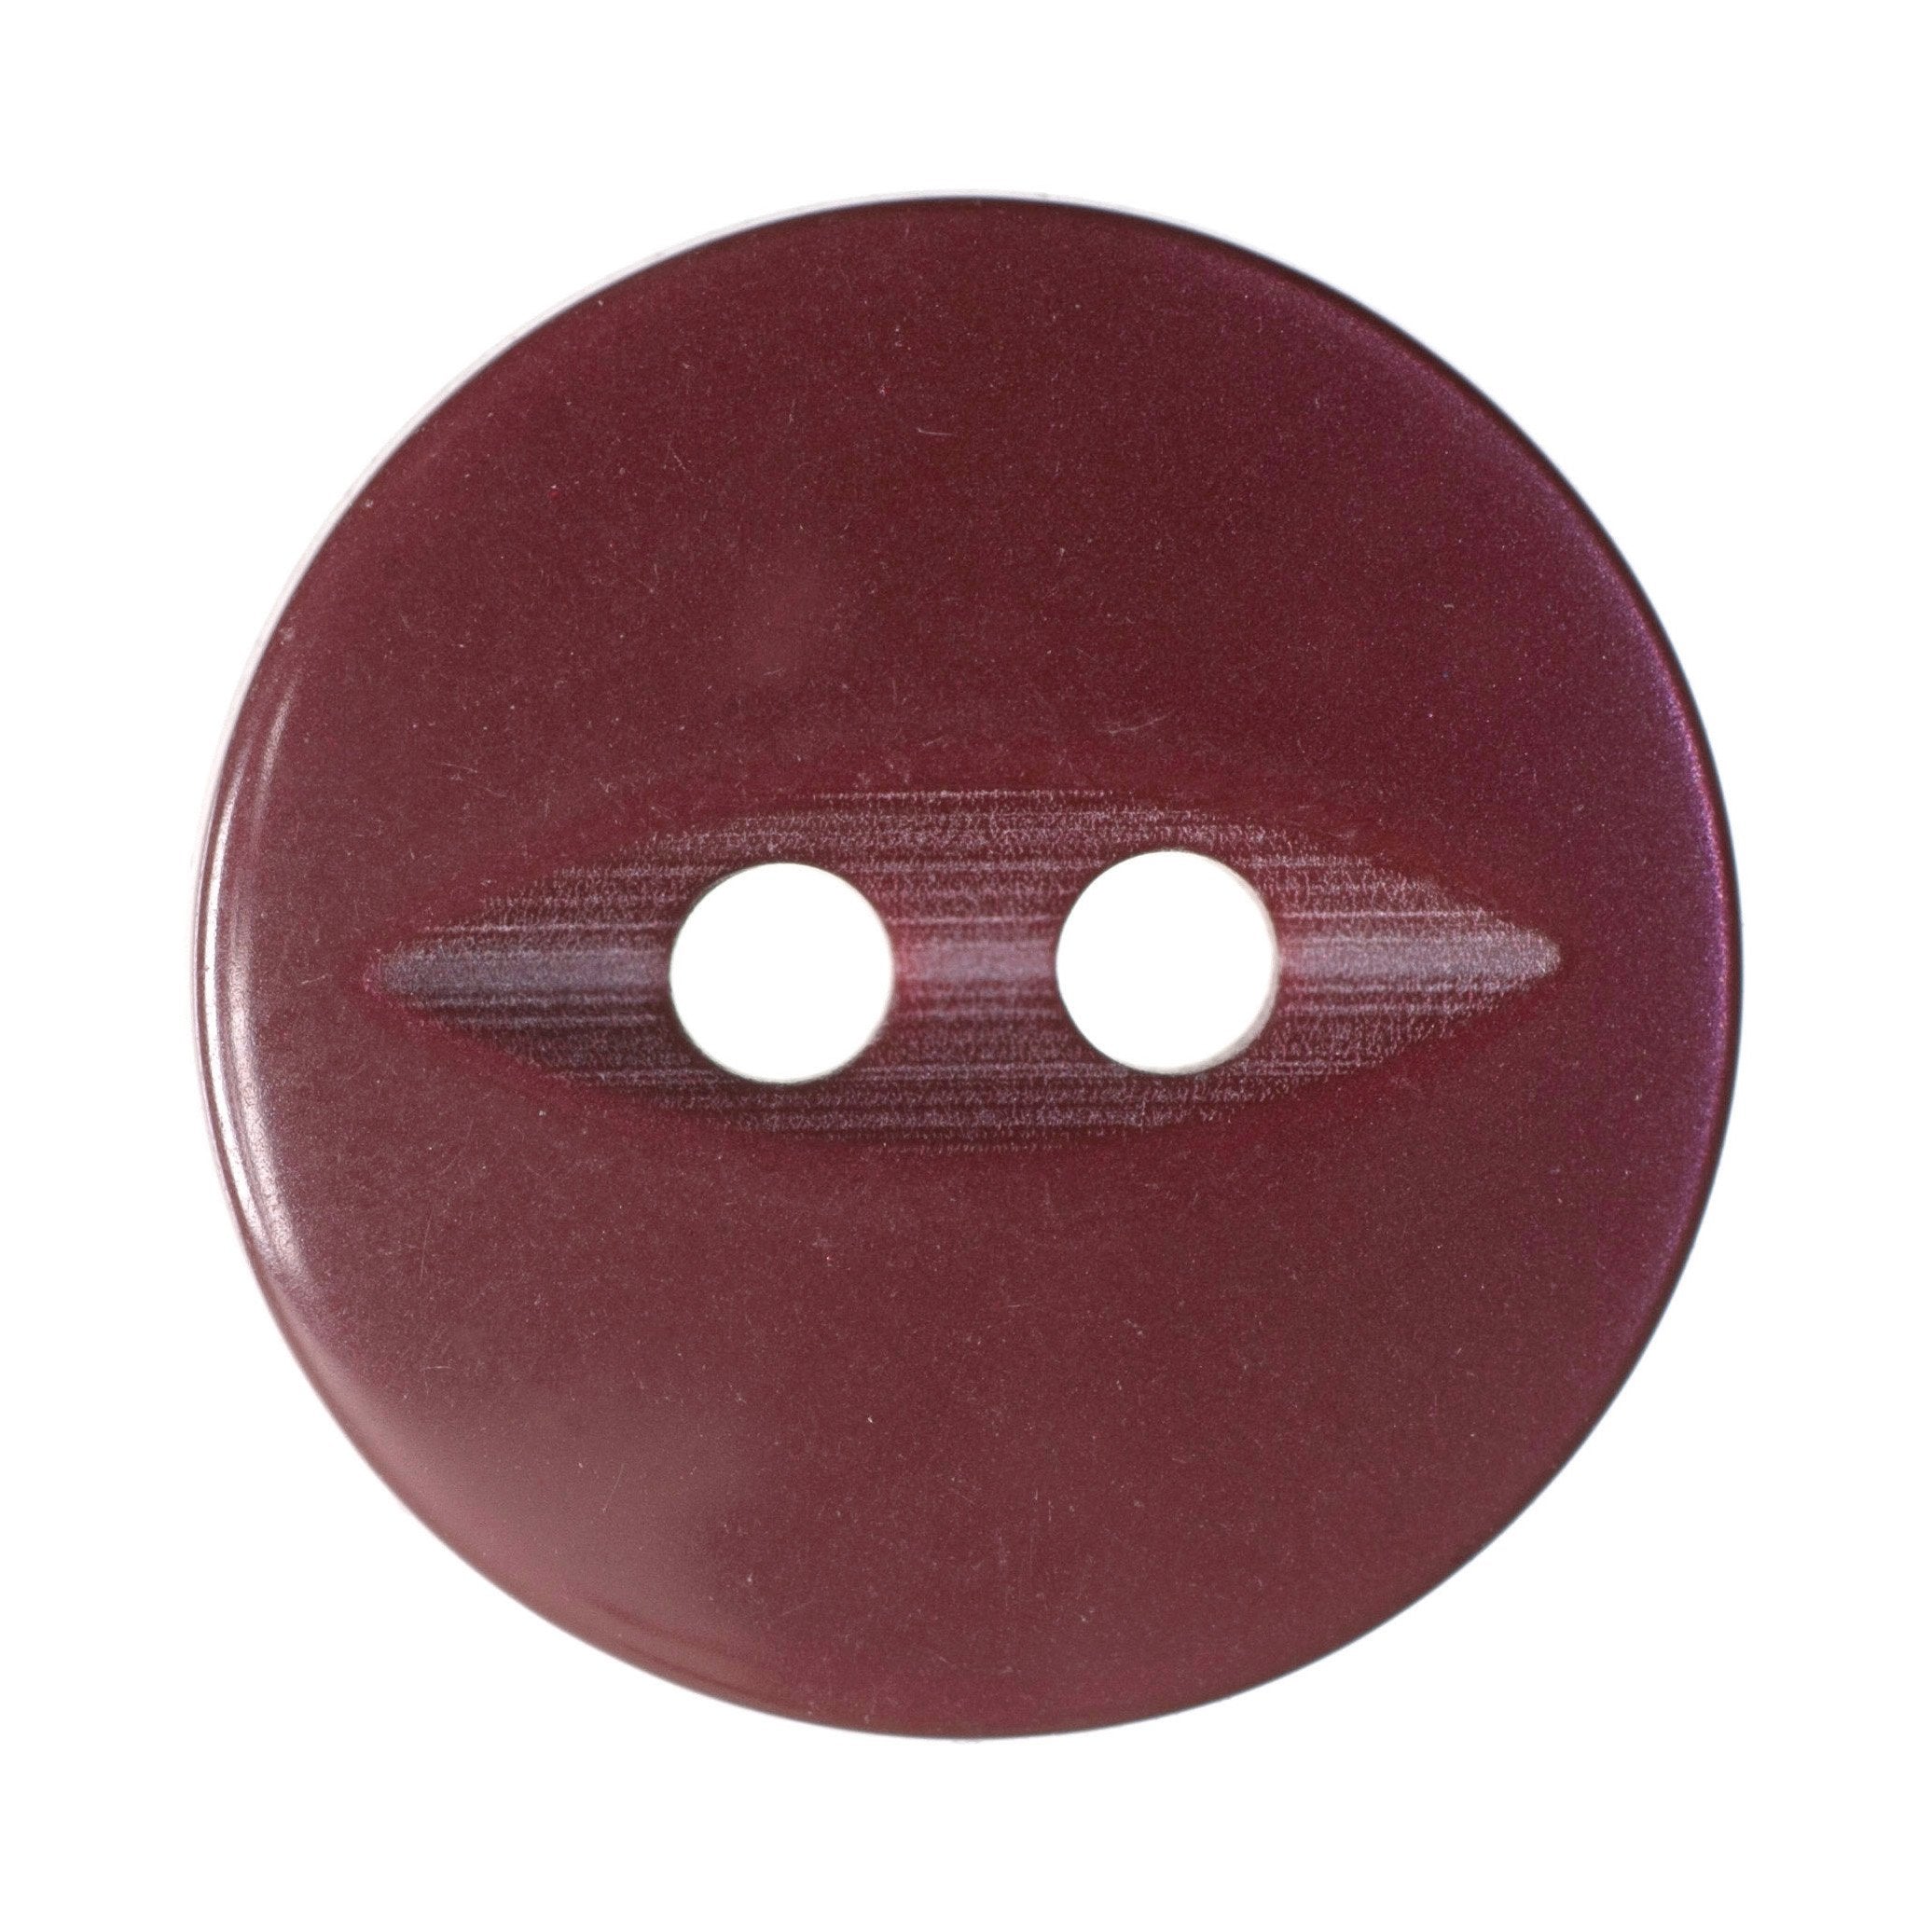 Basic Buttons, Wine colour from Jaycotts Sewing Supplies